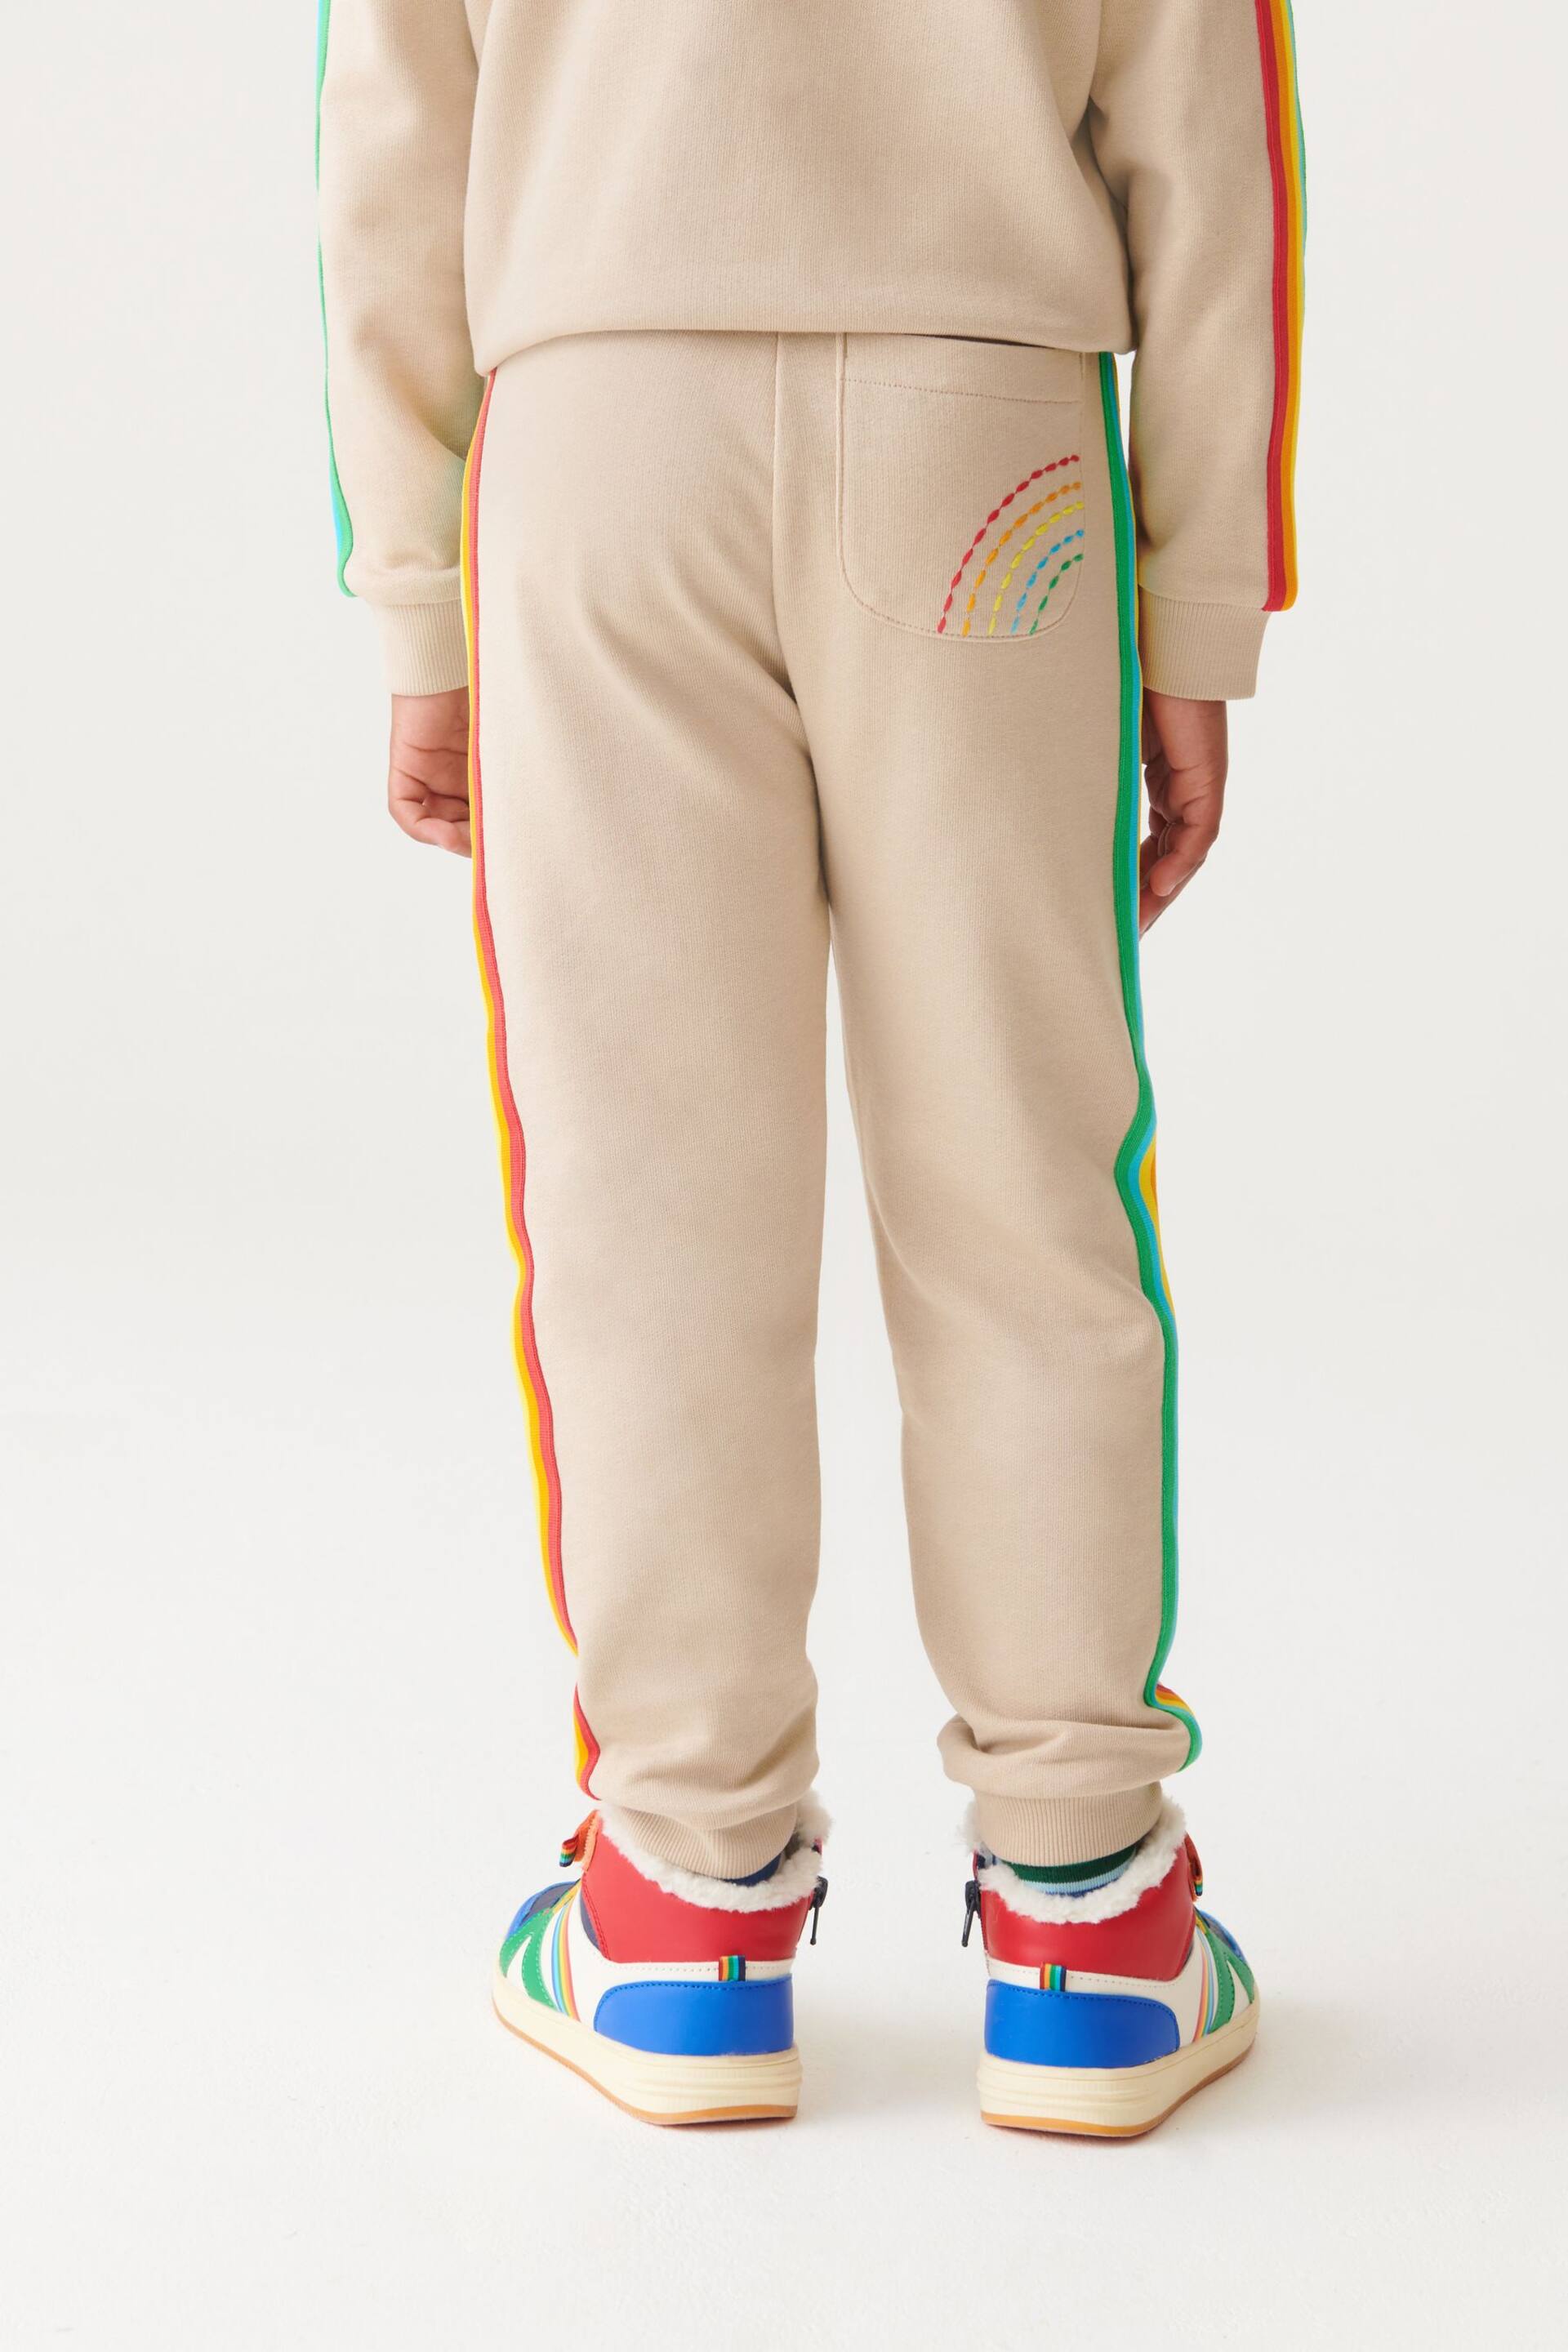 Little Bird by Jools Oliver Stone Rainbow Striped Joggers - Image 2 of 9